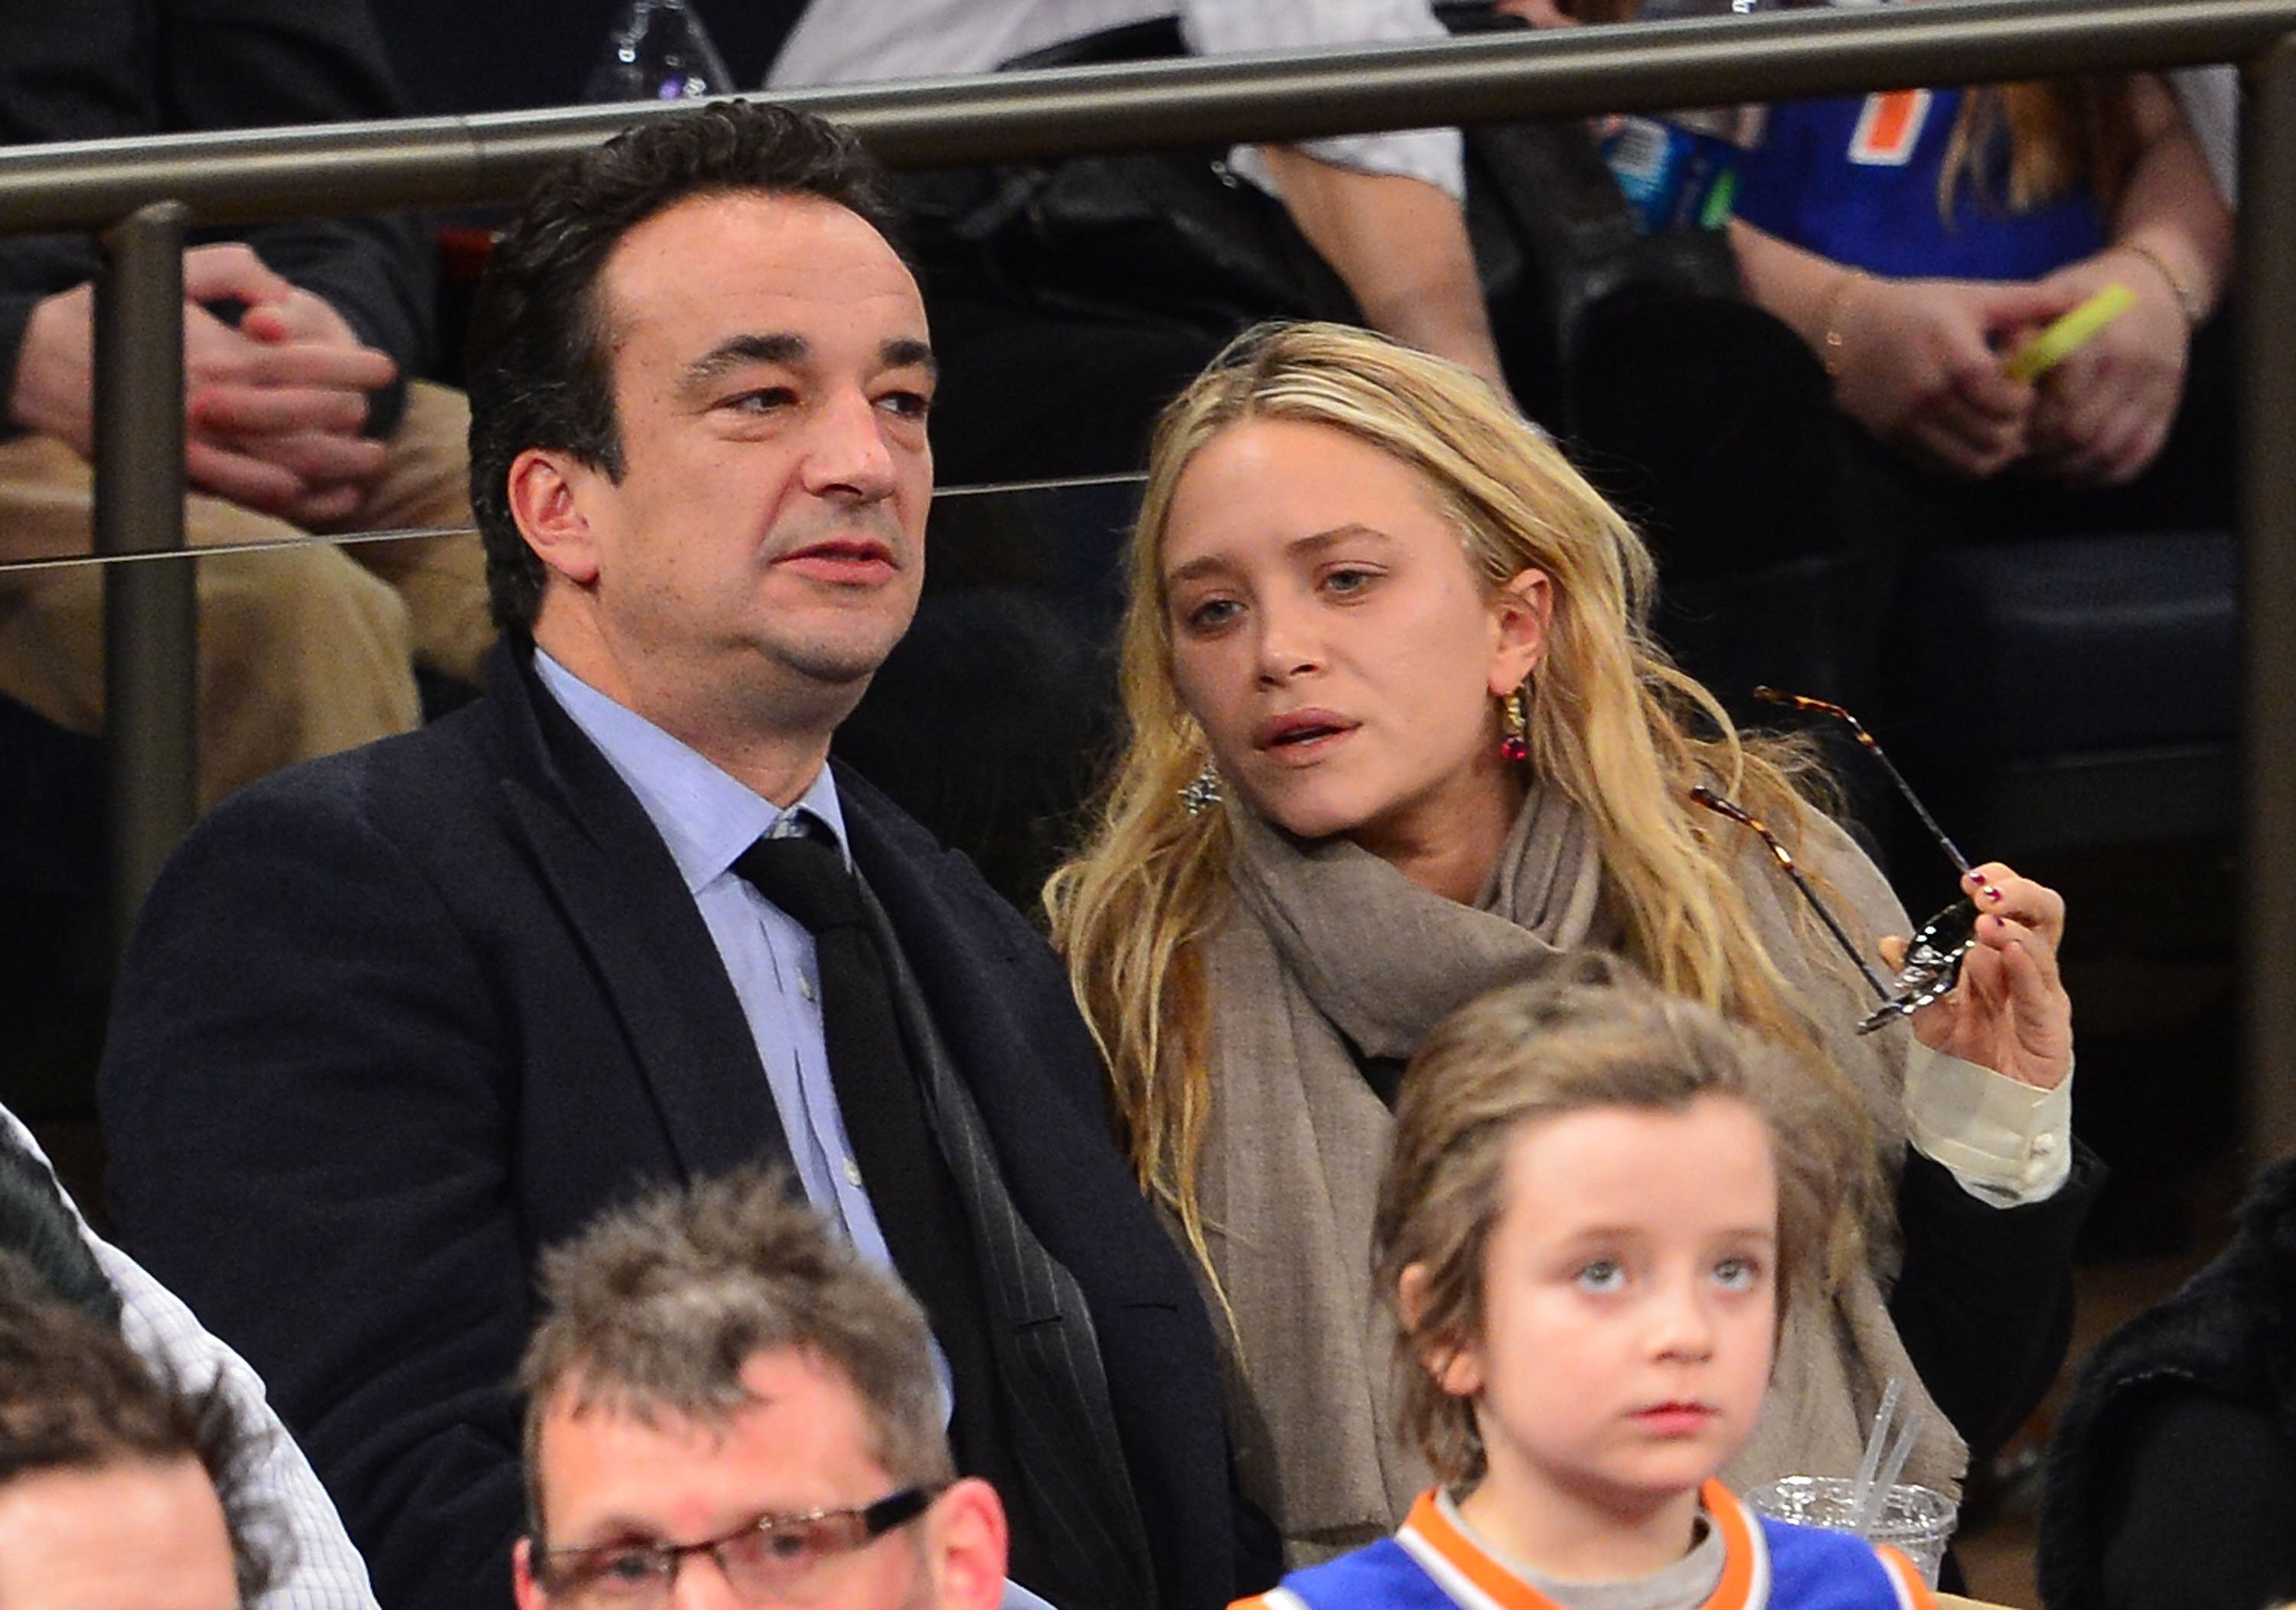 Olivier Sarkozy and Mary-Kate Olsen during the Orlando Magic vs New York Knicks game at Madison Square Garden on March 20, 2013 in New York City. / Source: Getty Images